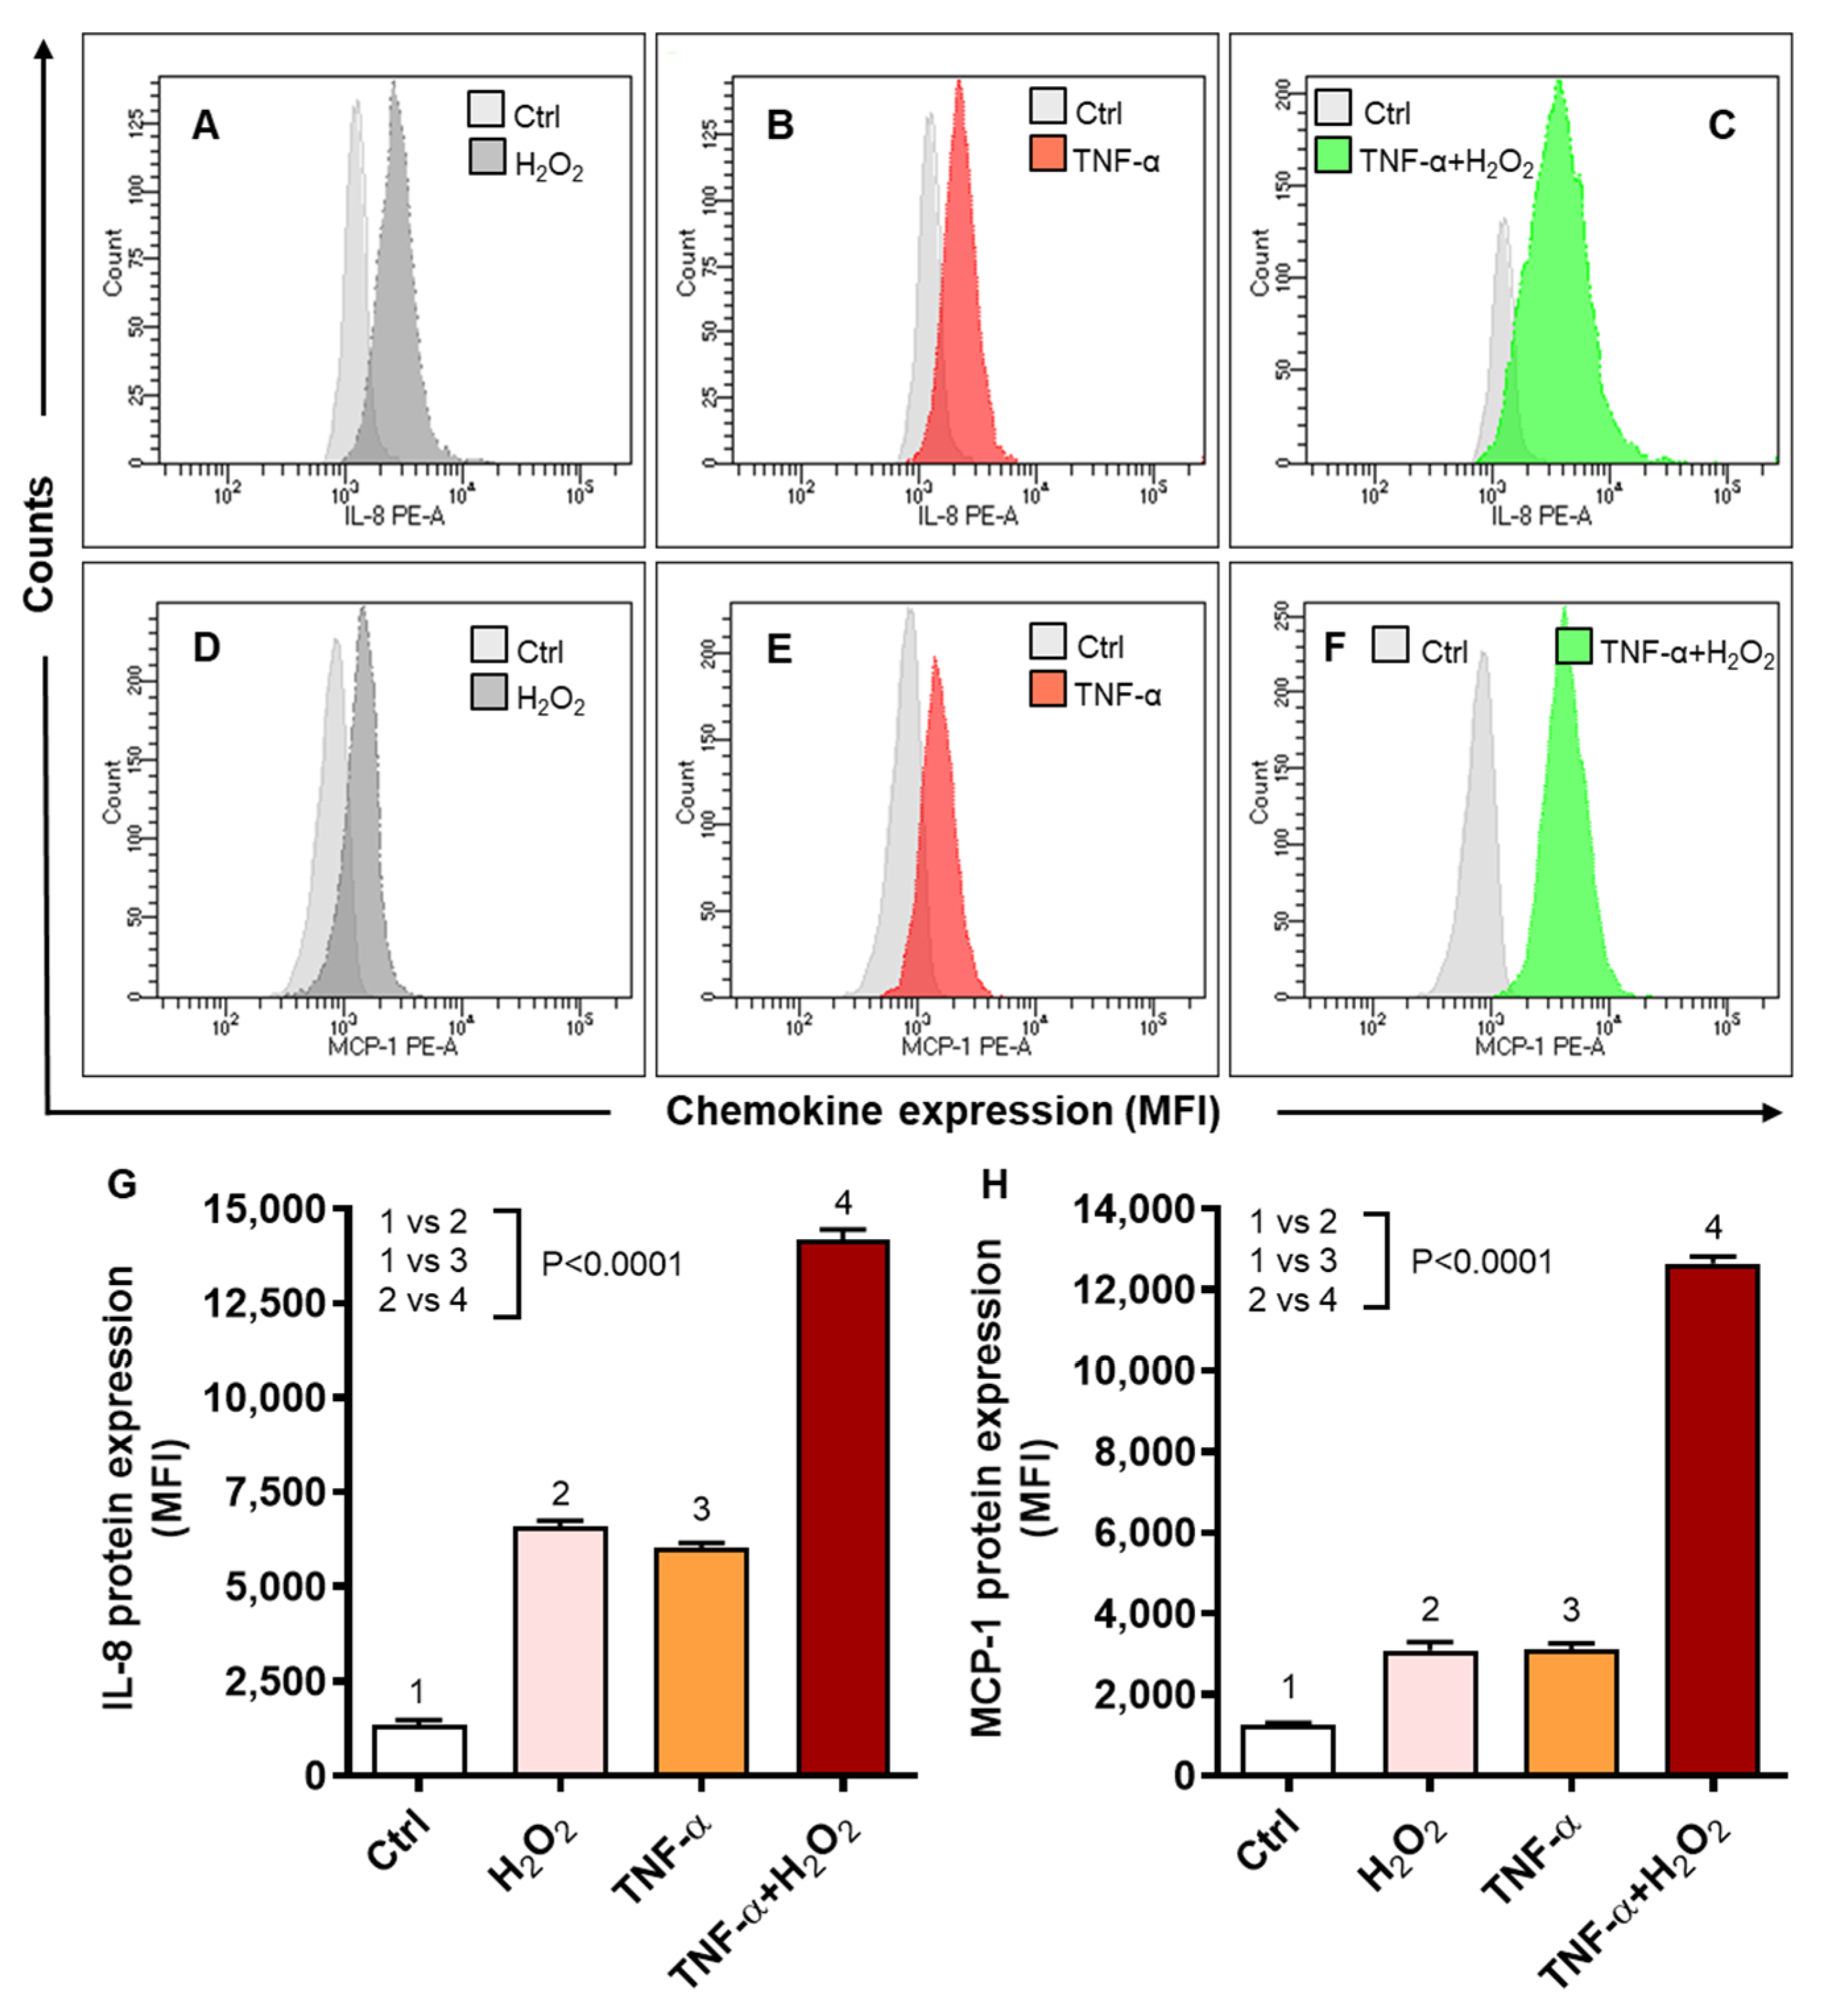 IJMS | Free Full-Text | ROS/TNF-α Crosstalk Triggers the Expression of IL-8  and MCP-1 in Human Monocytic THP-1 Cells via the NF-κB and ERK1/2 Mediated  Signaling